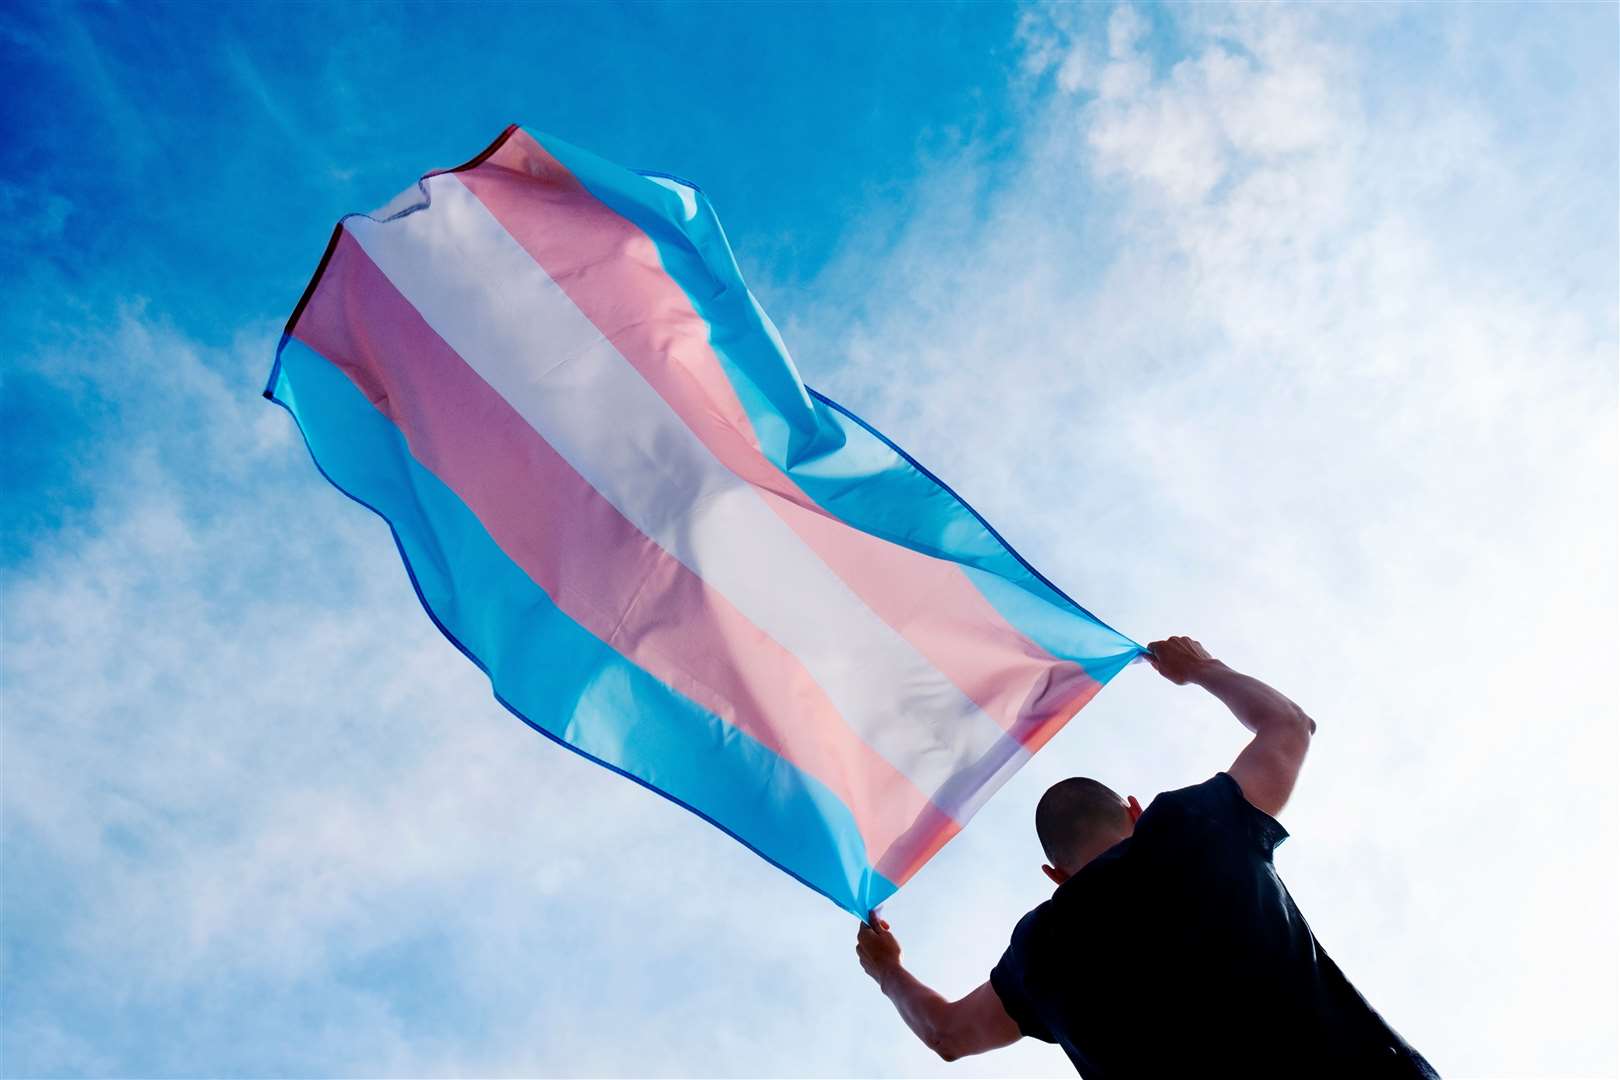 a young caucasian person, seen from behind, holding a transgender pride flag over his or her head against the blue sky